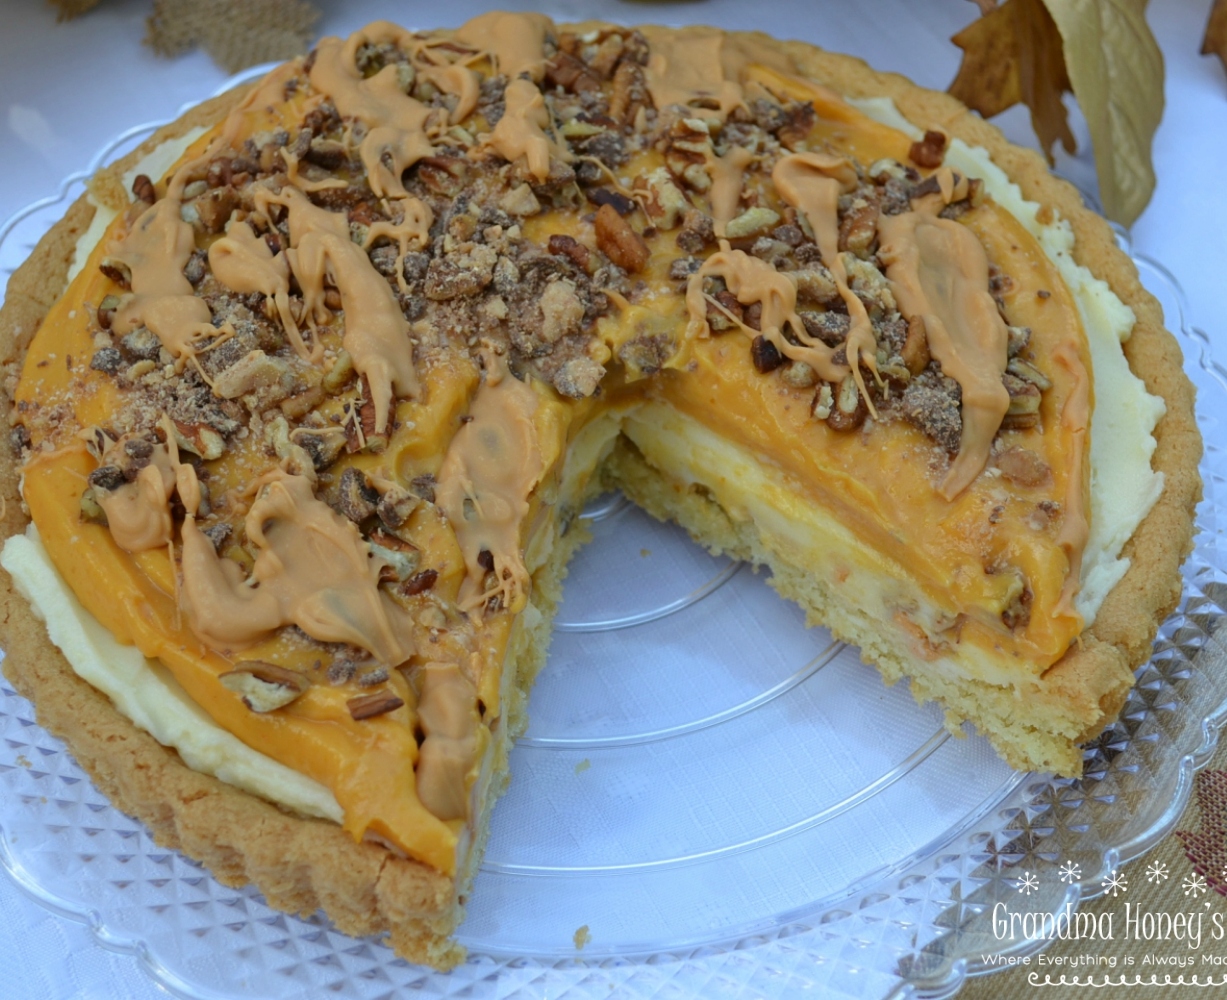 Pumpkin Butterscotch Mascarpone Cookie Tart is a perfect fall dessert with a cookie tart and layers of pumpkin, mascarpone cheese and toppings of toffee bits and butterscotch.